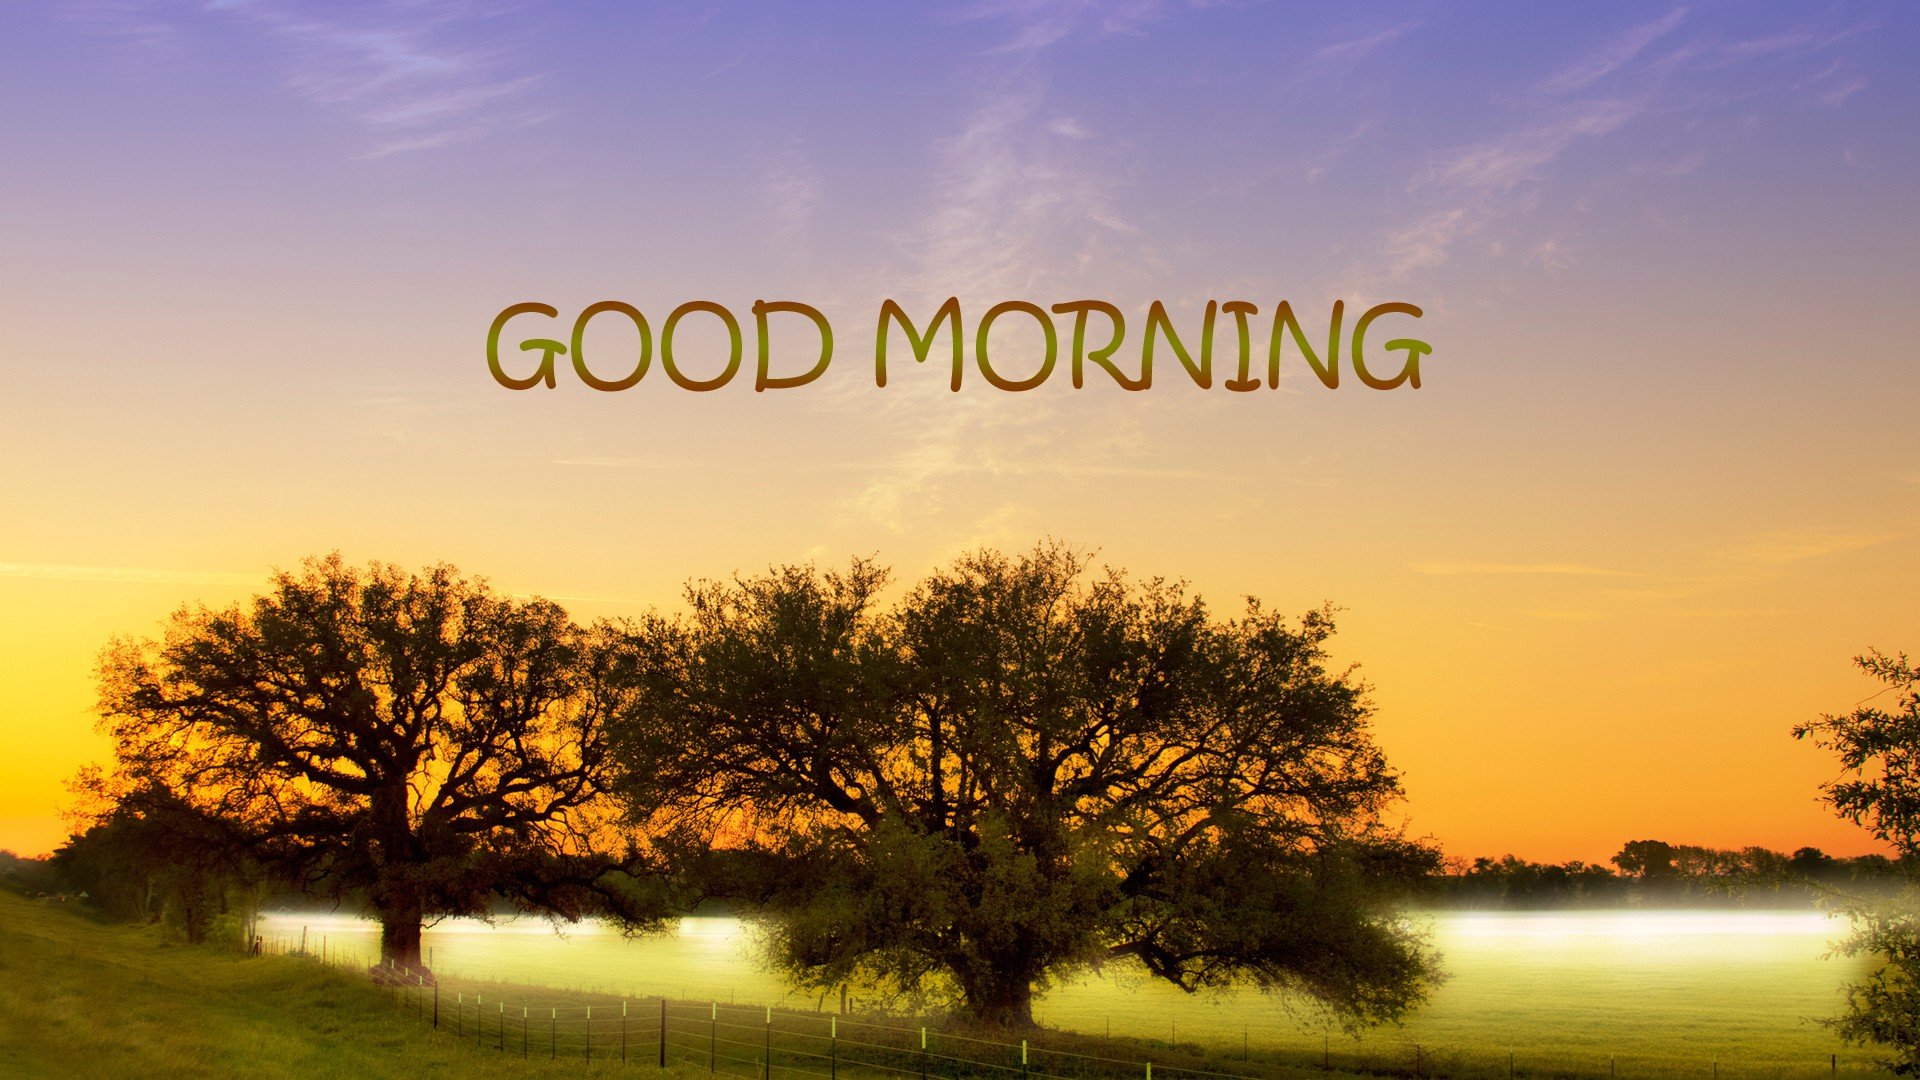 Good Morning HD Wallpaper Pictures Hd Wallpapers